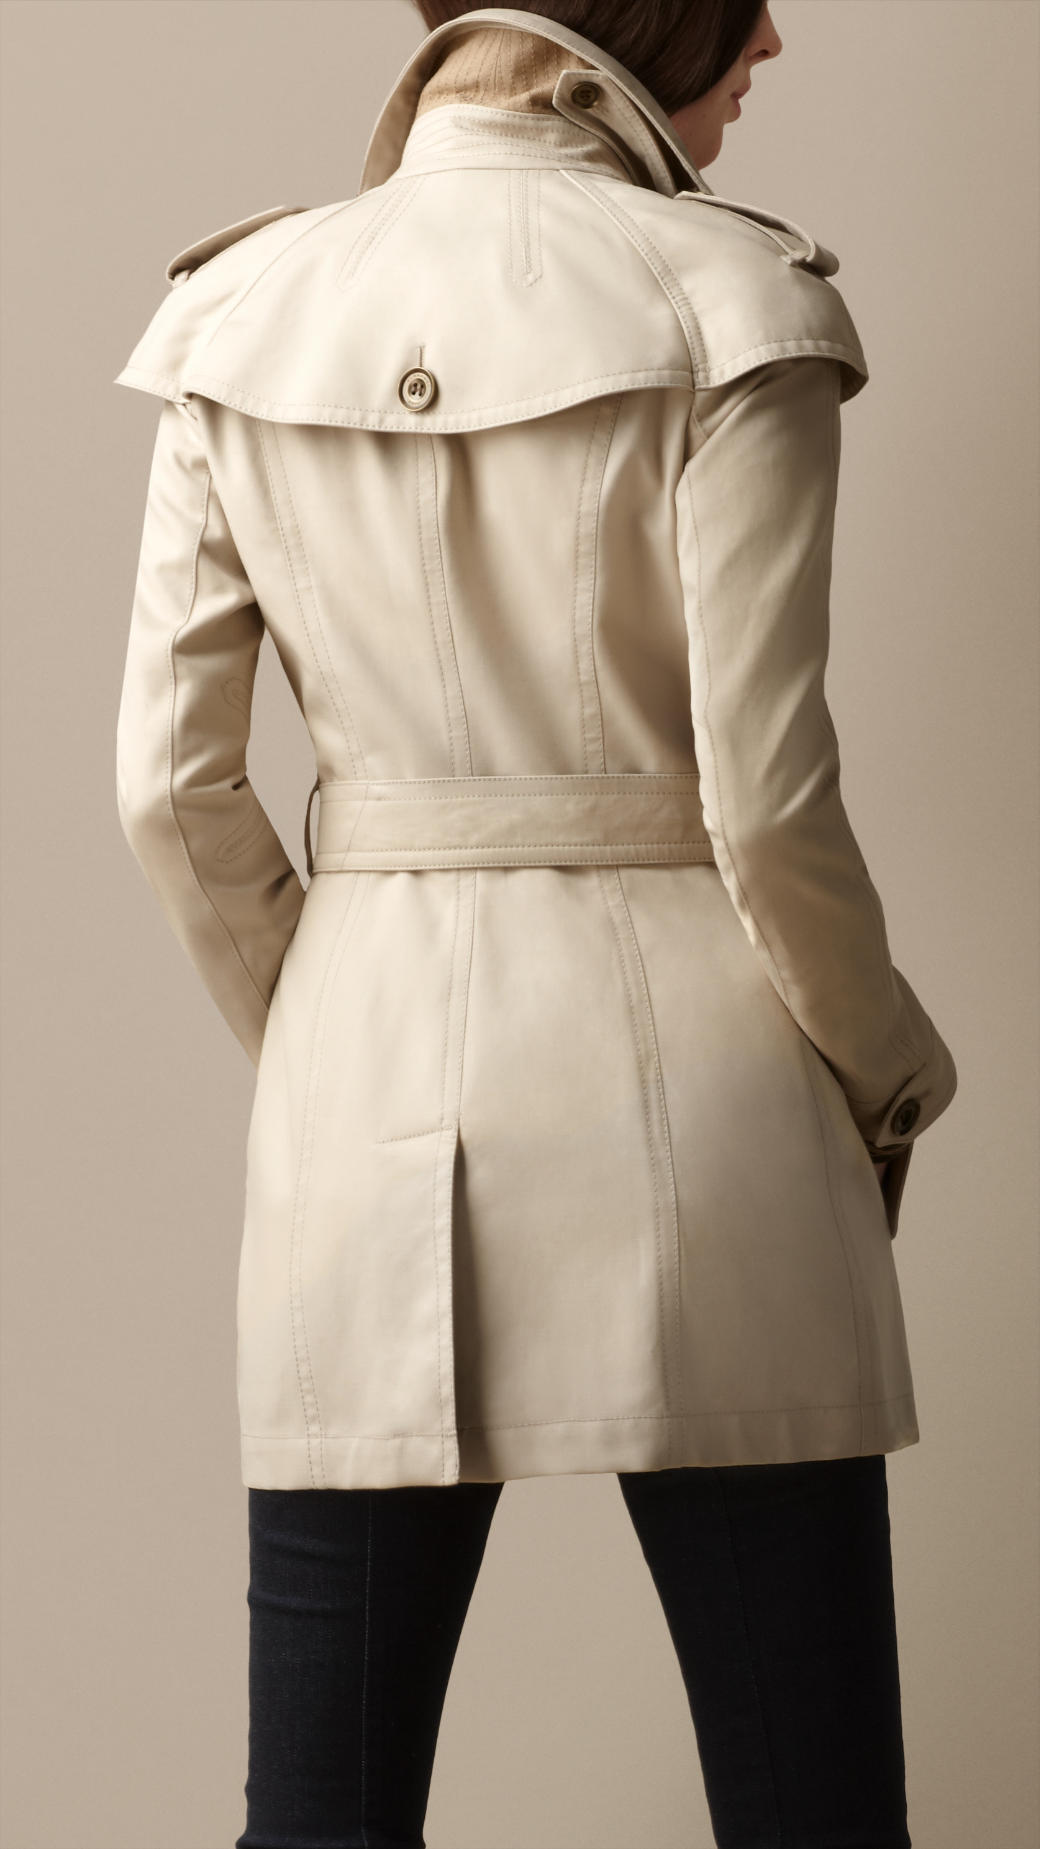 Lyst - Burberry Cape Detail Trench Coat in Natural